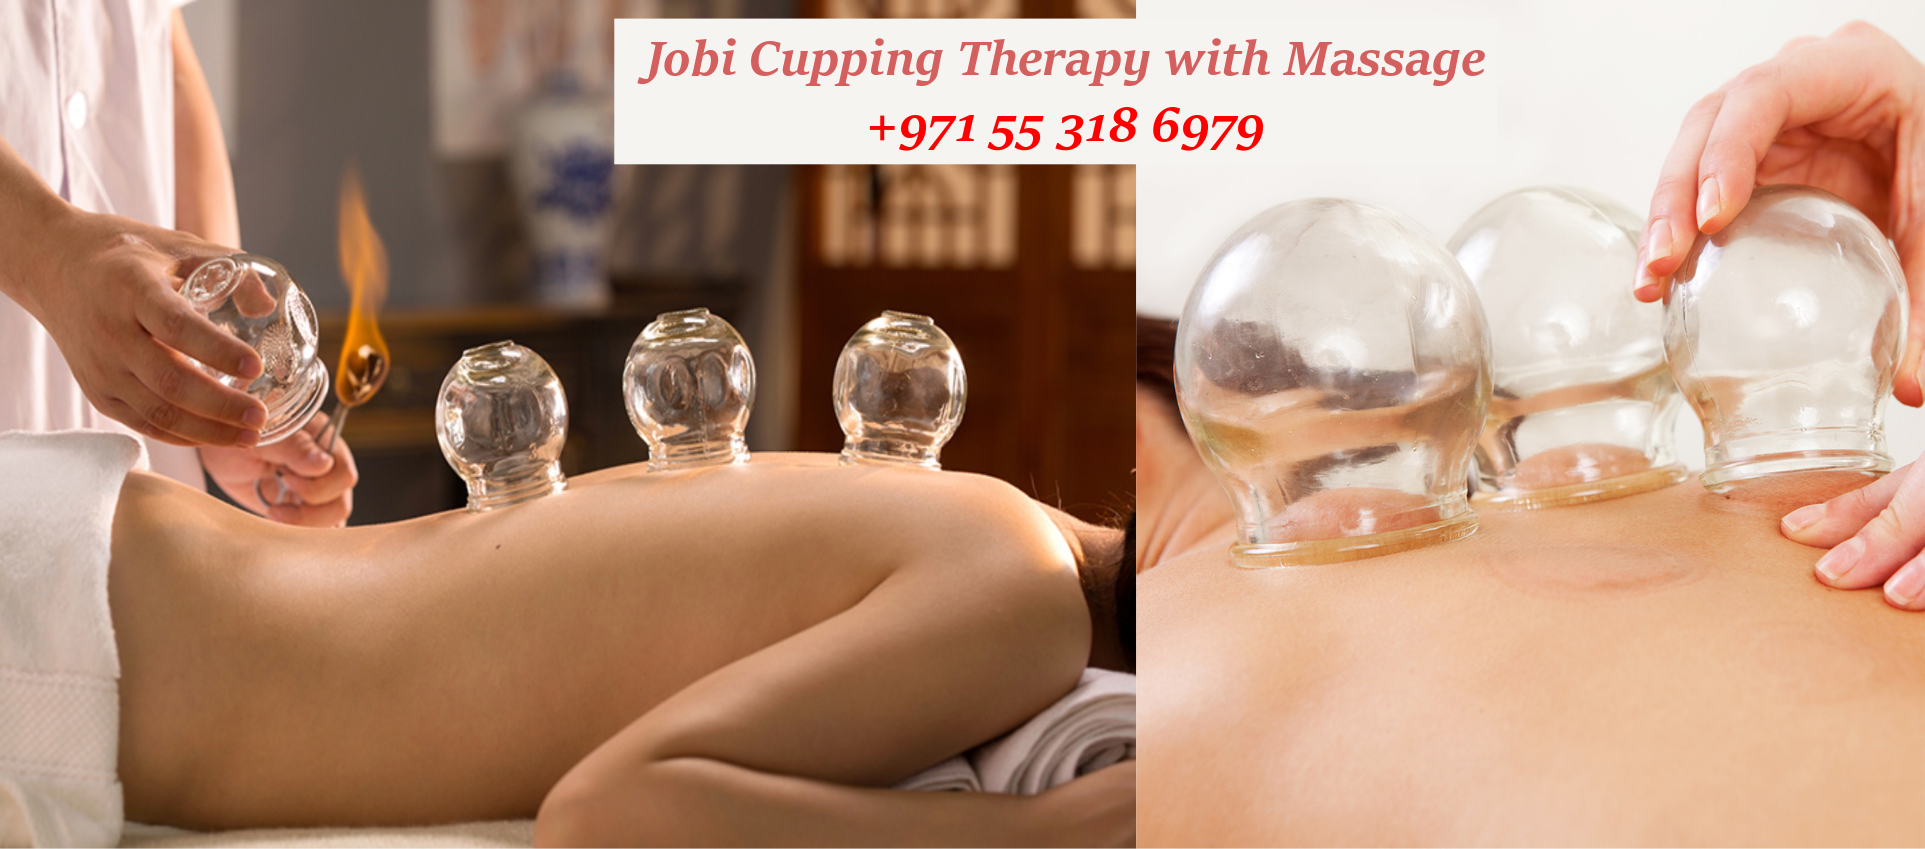 Jobi Cupping Therapy Header 1